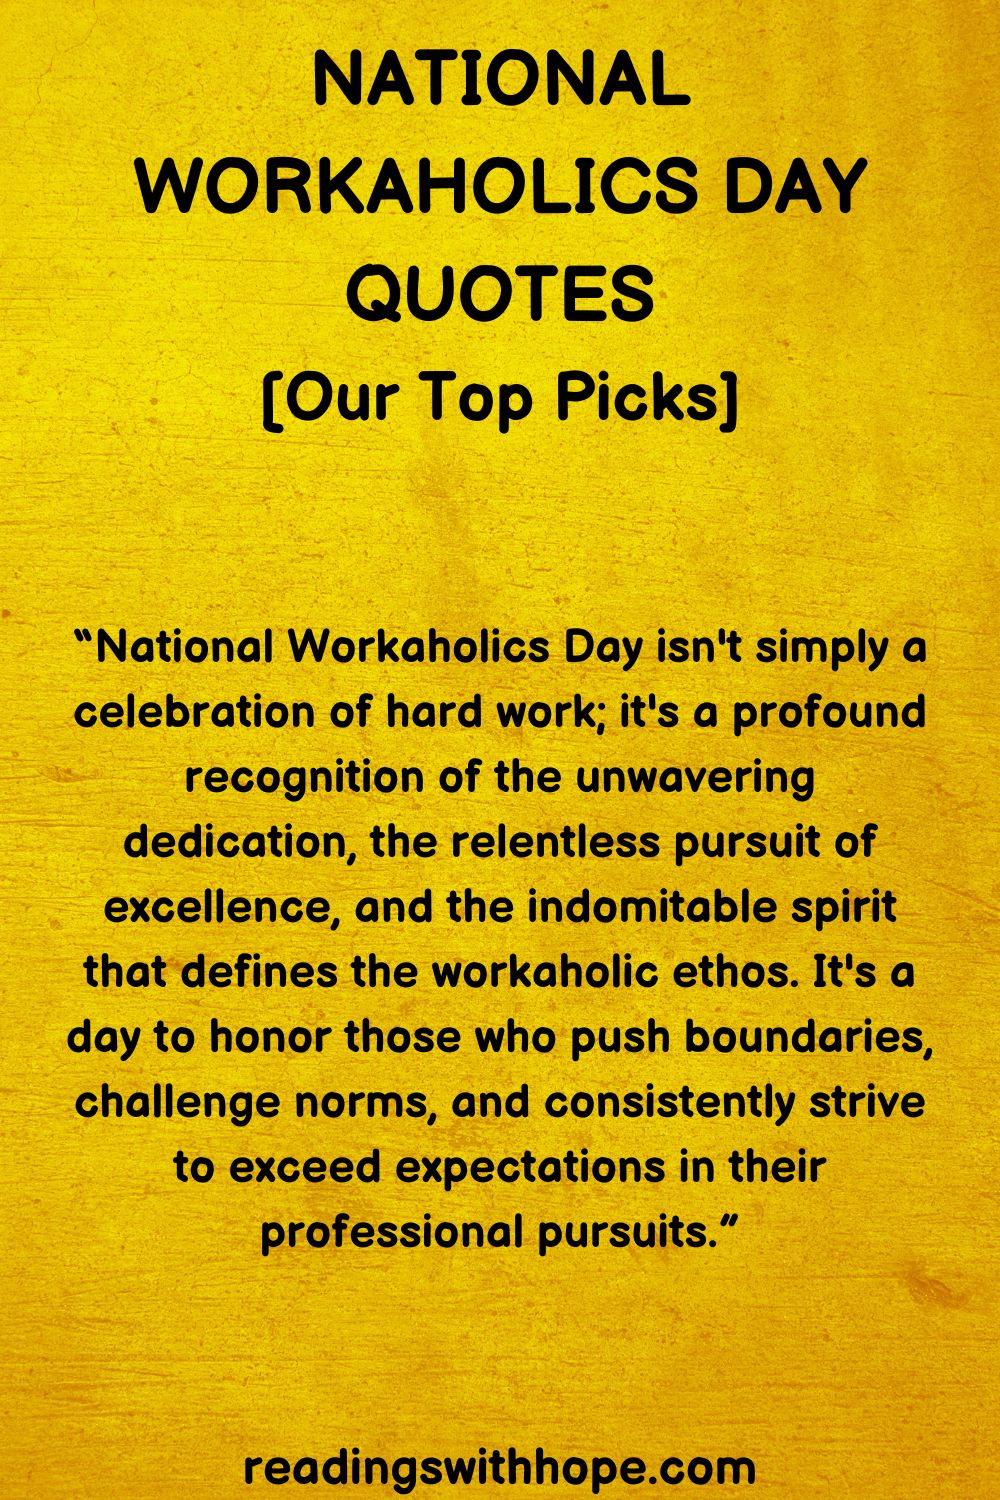 32 National Workaholics Day Quotes